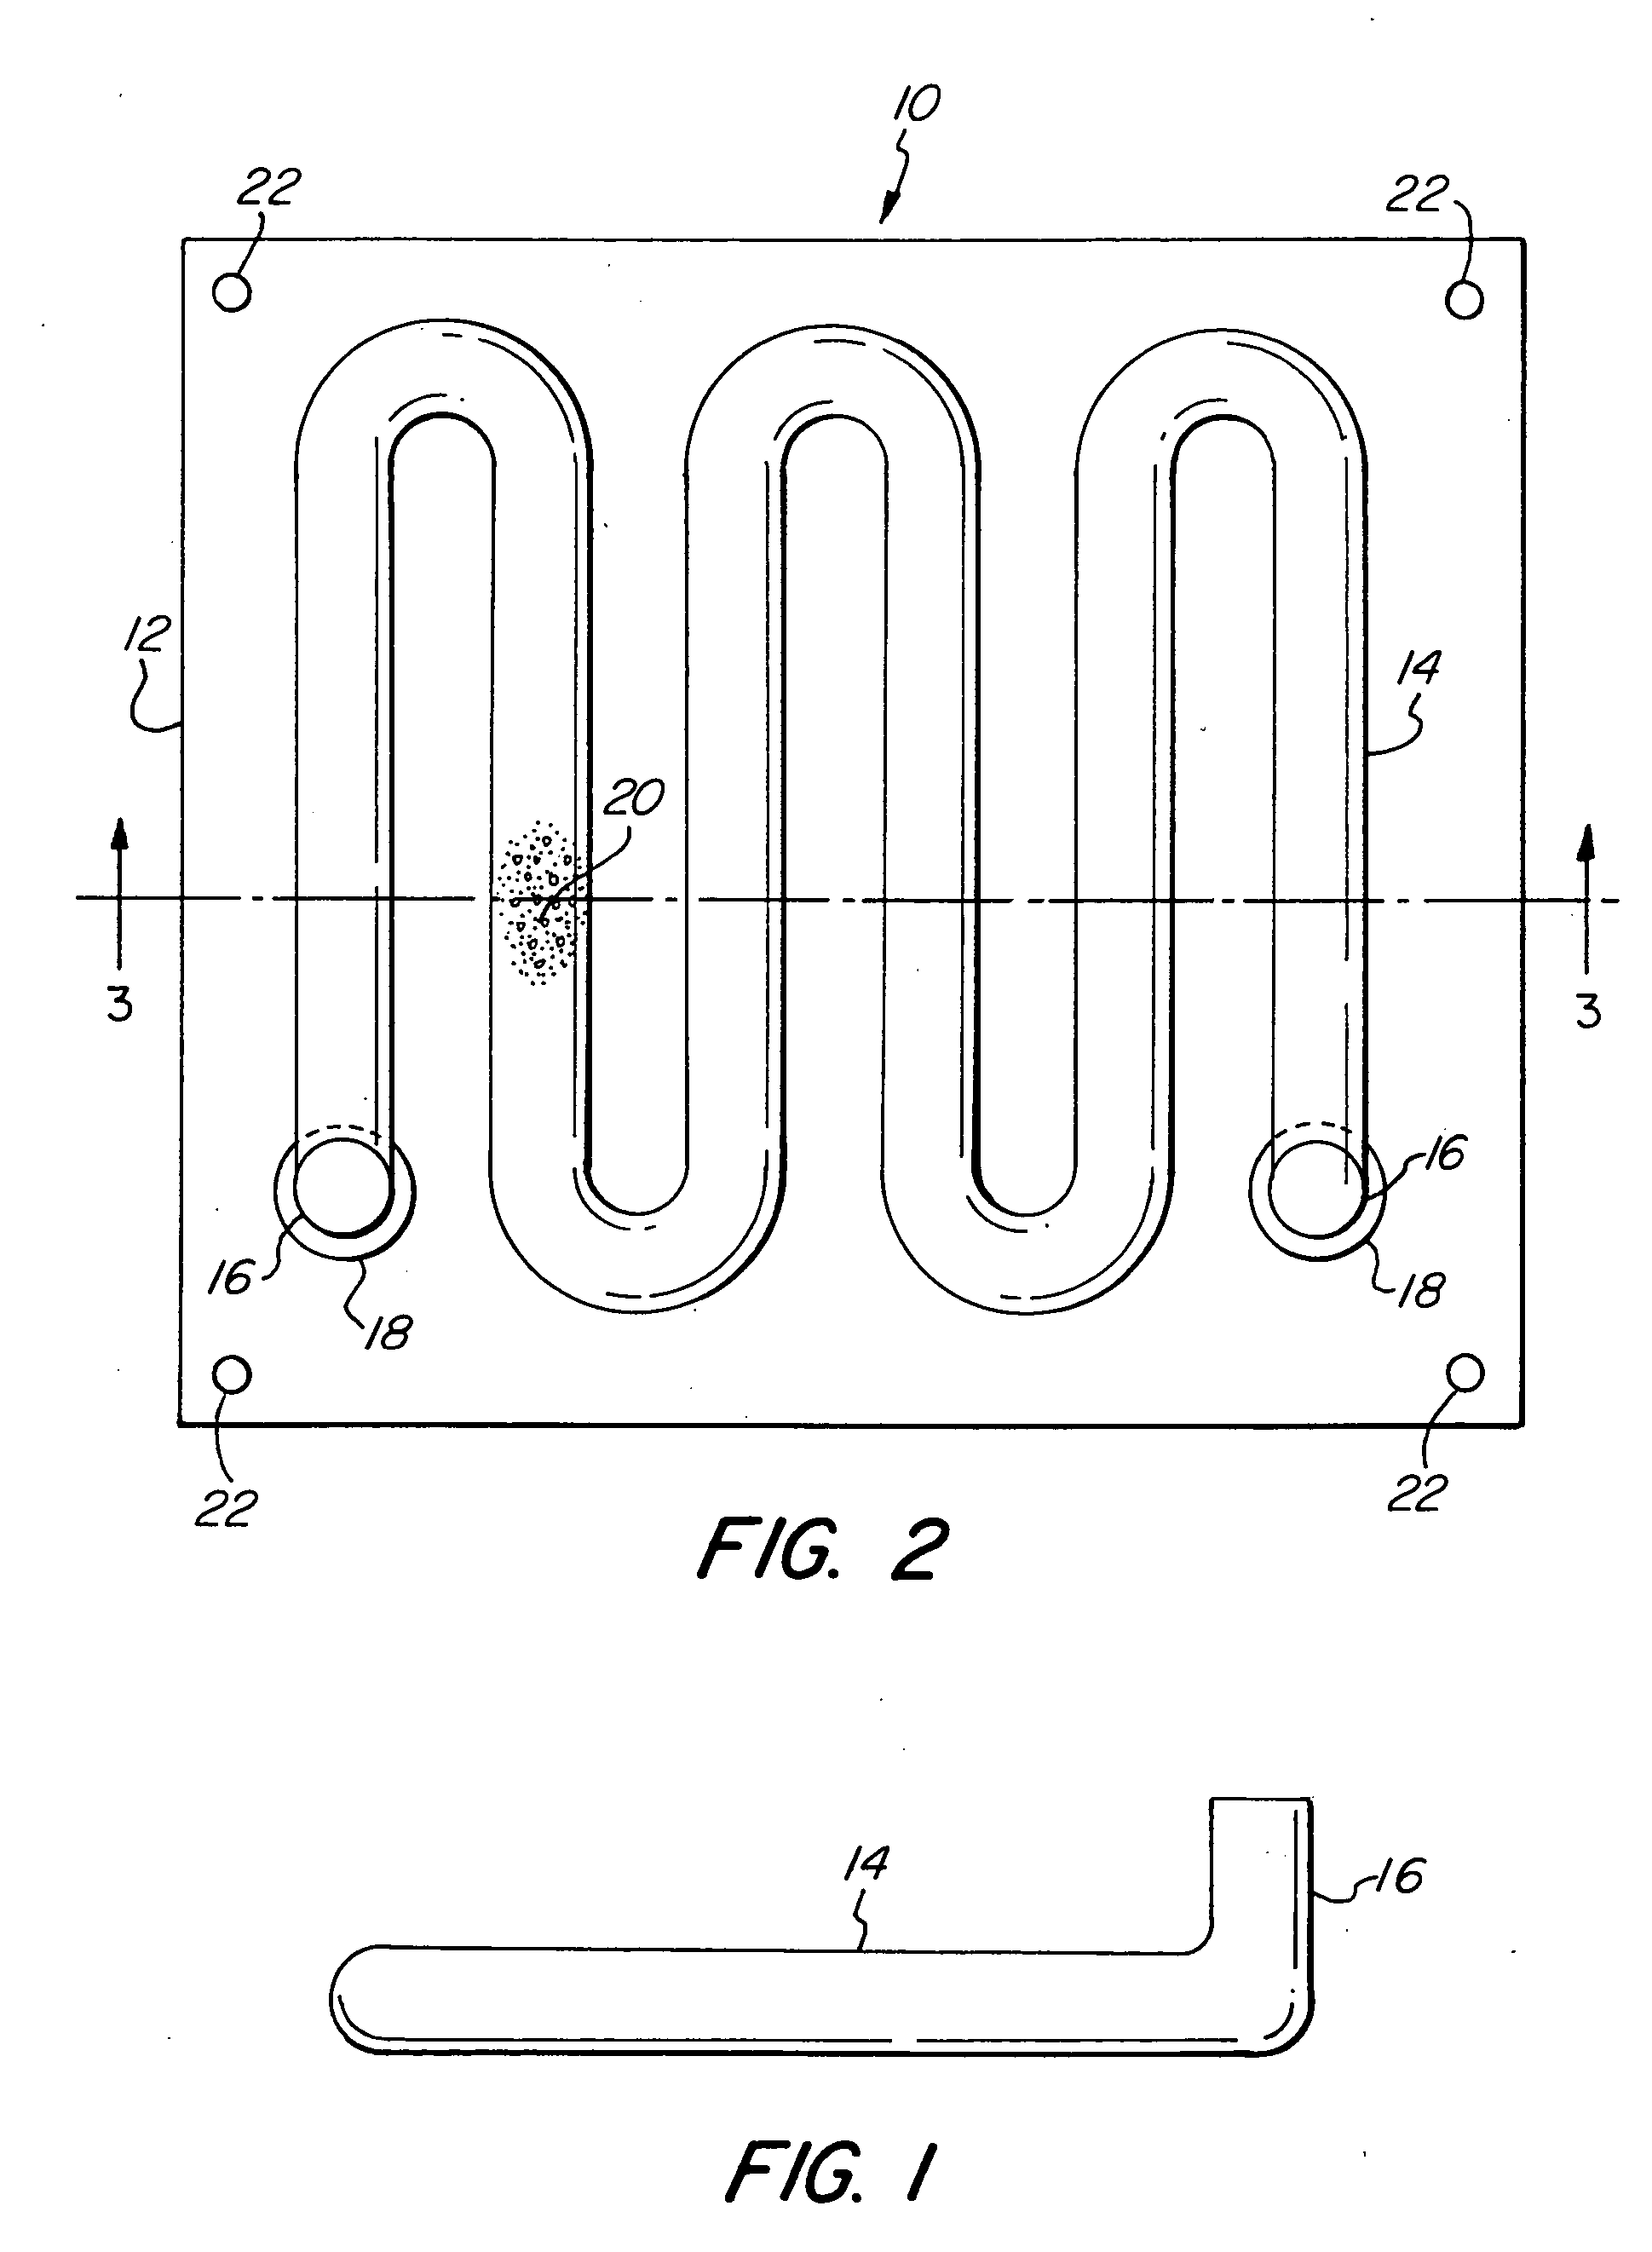 Device and method for coating serpentine fluorescent lamps